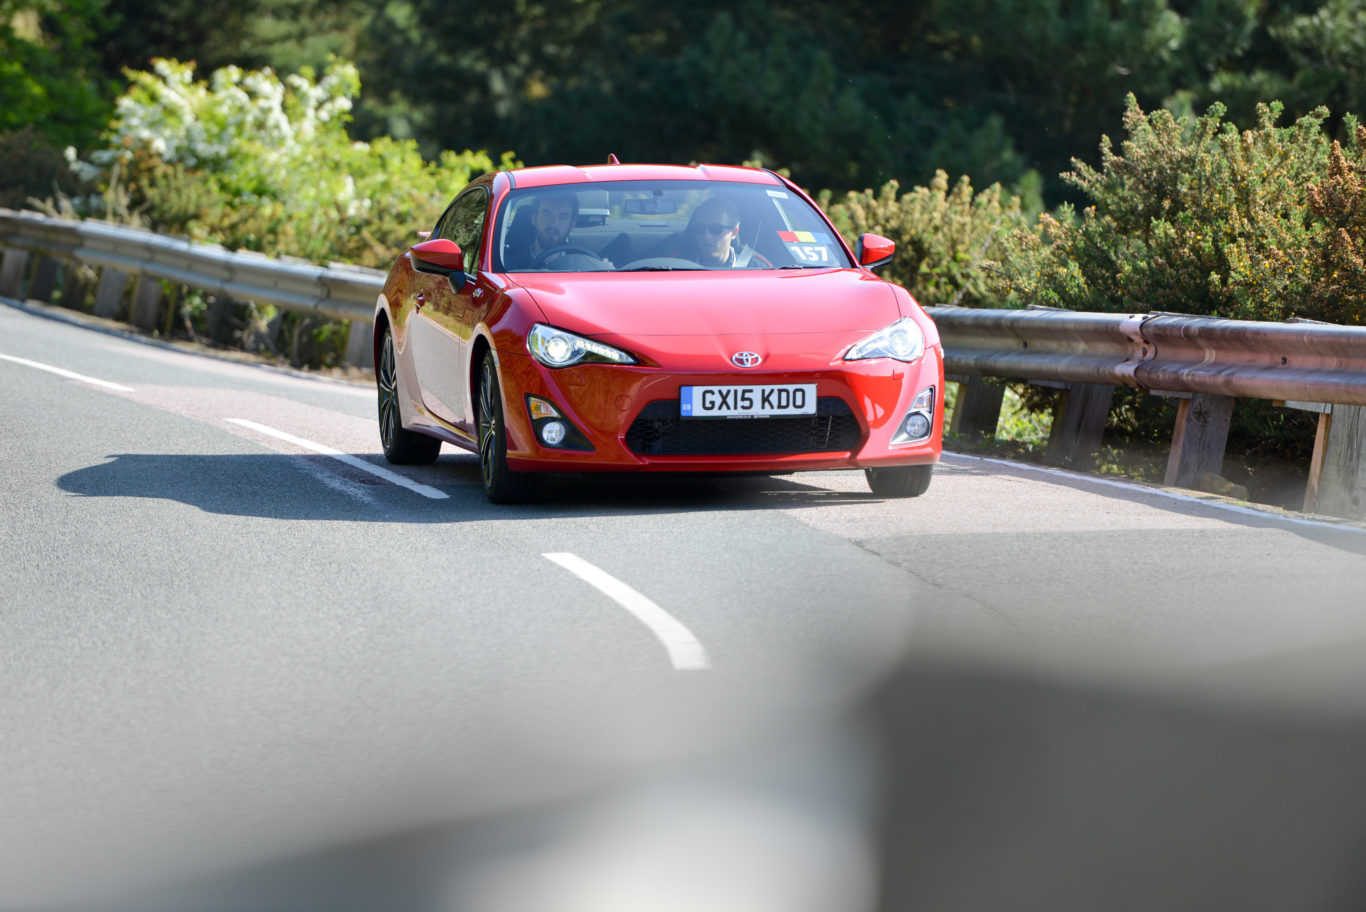 The Toyota GT86 is nimble and exciting to drive